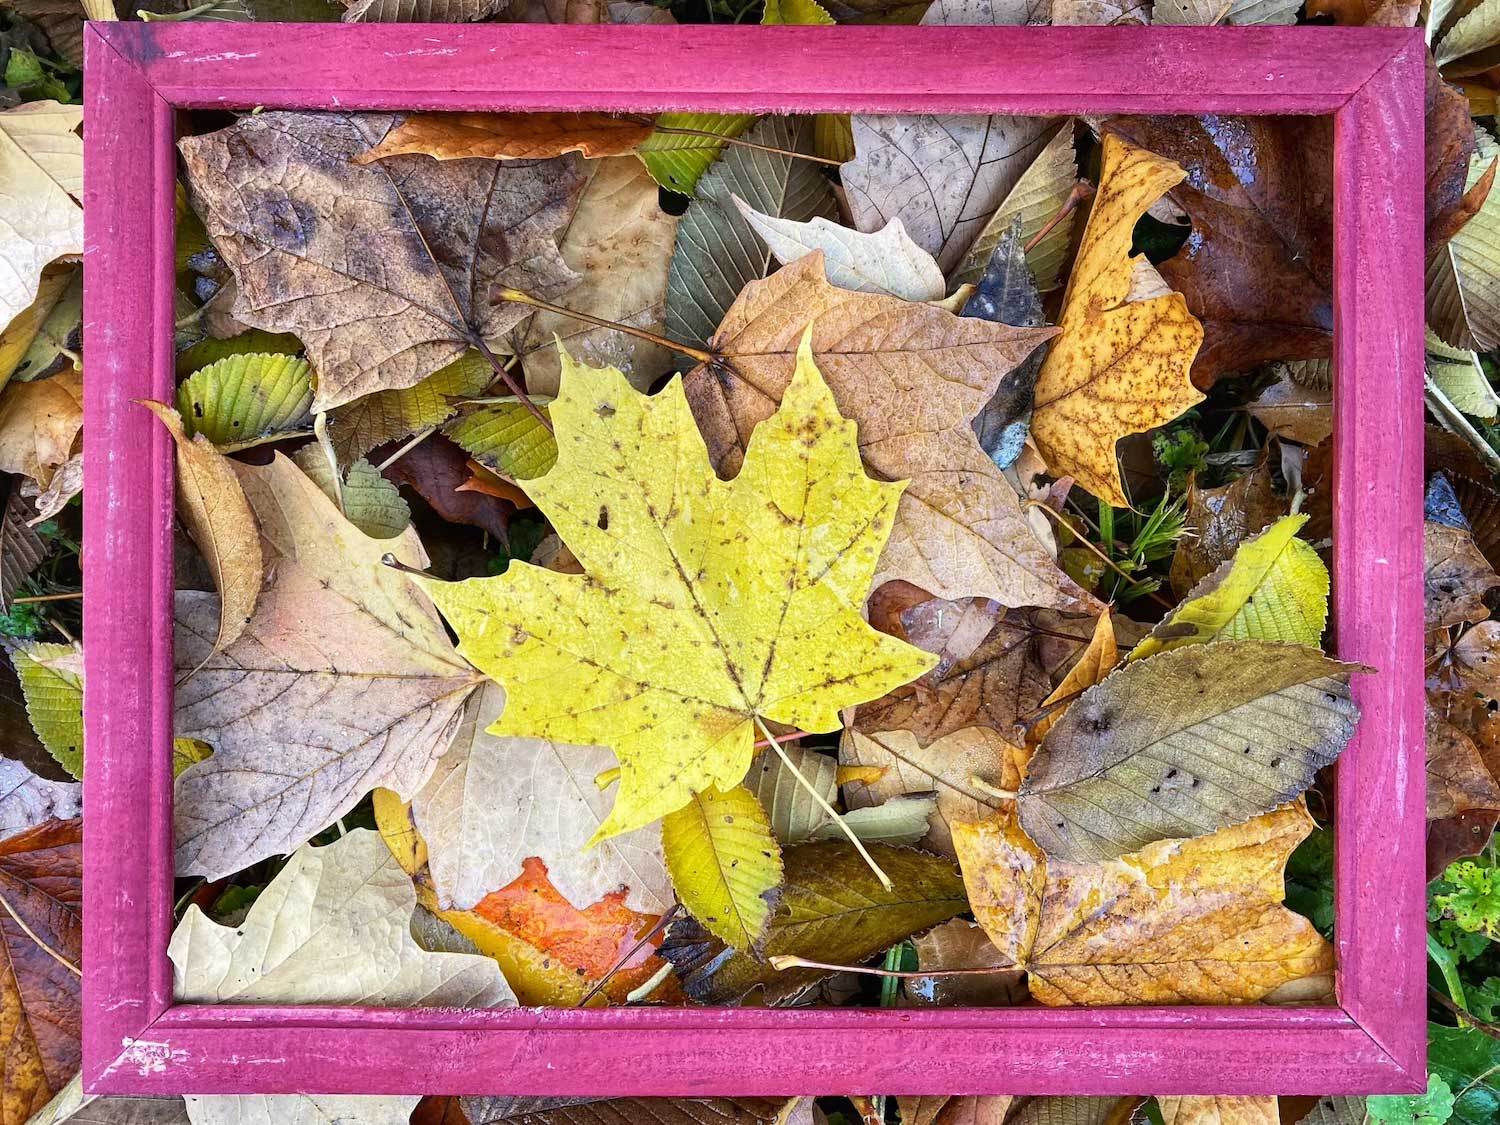 A wooden frame around leaves on the ground.